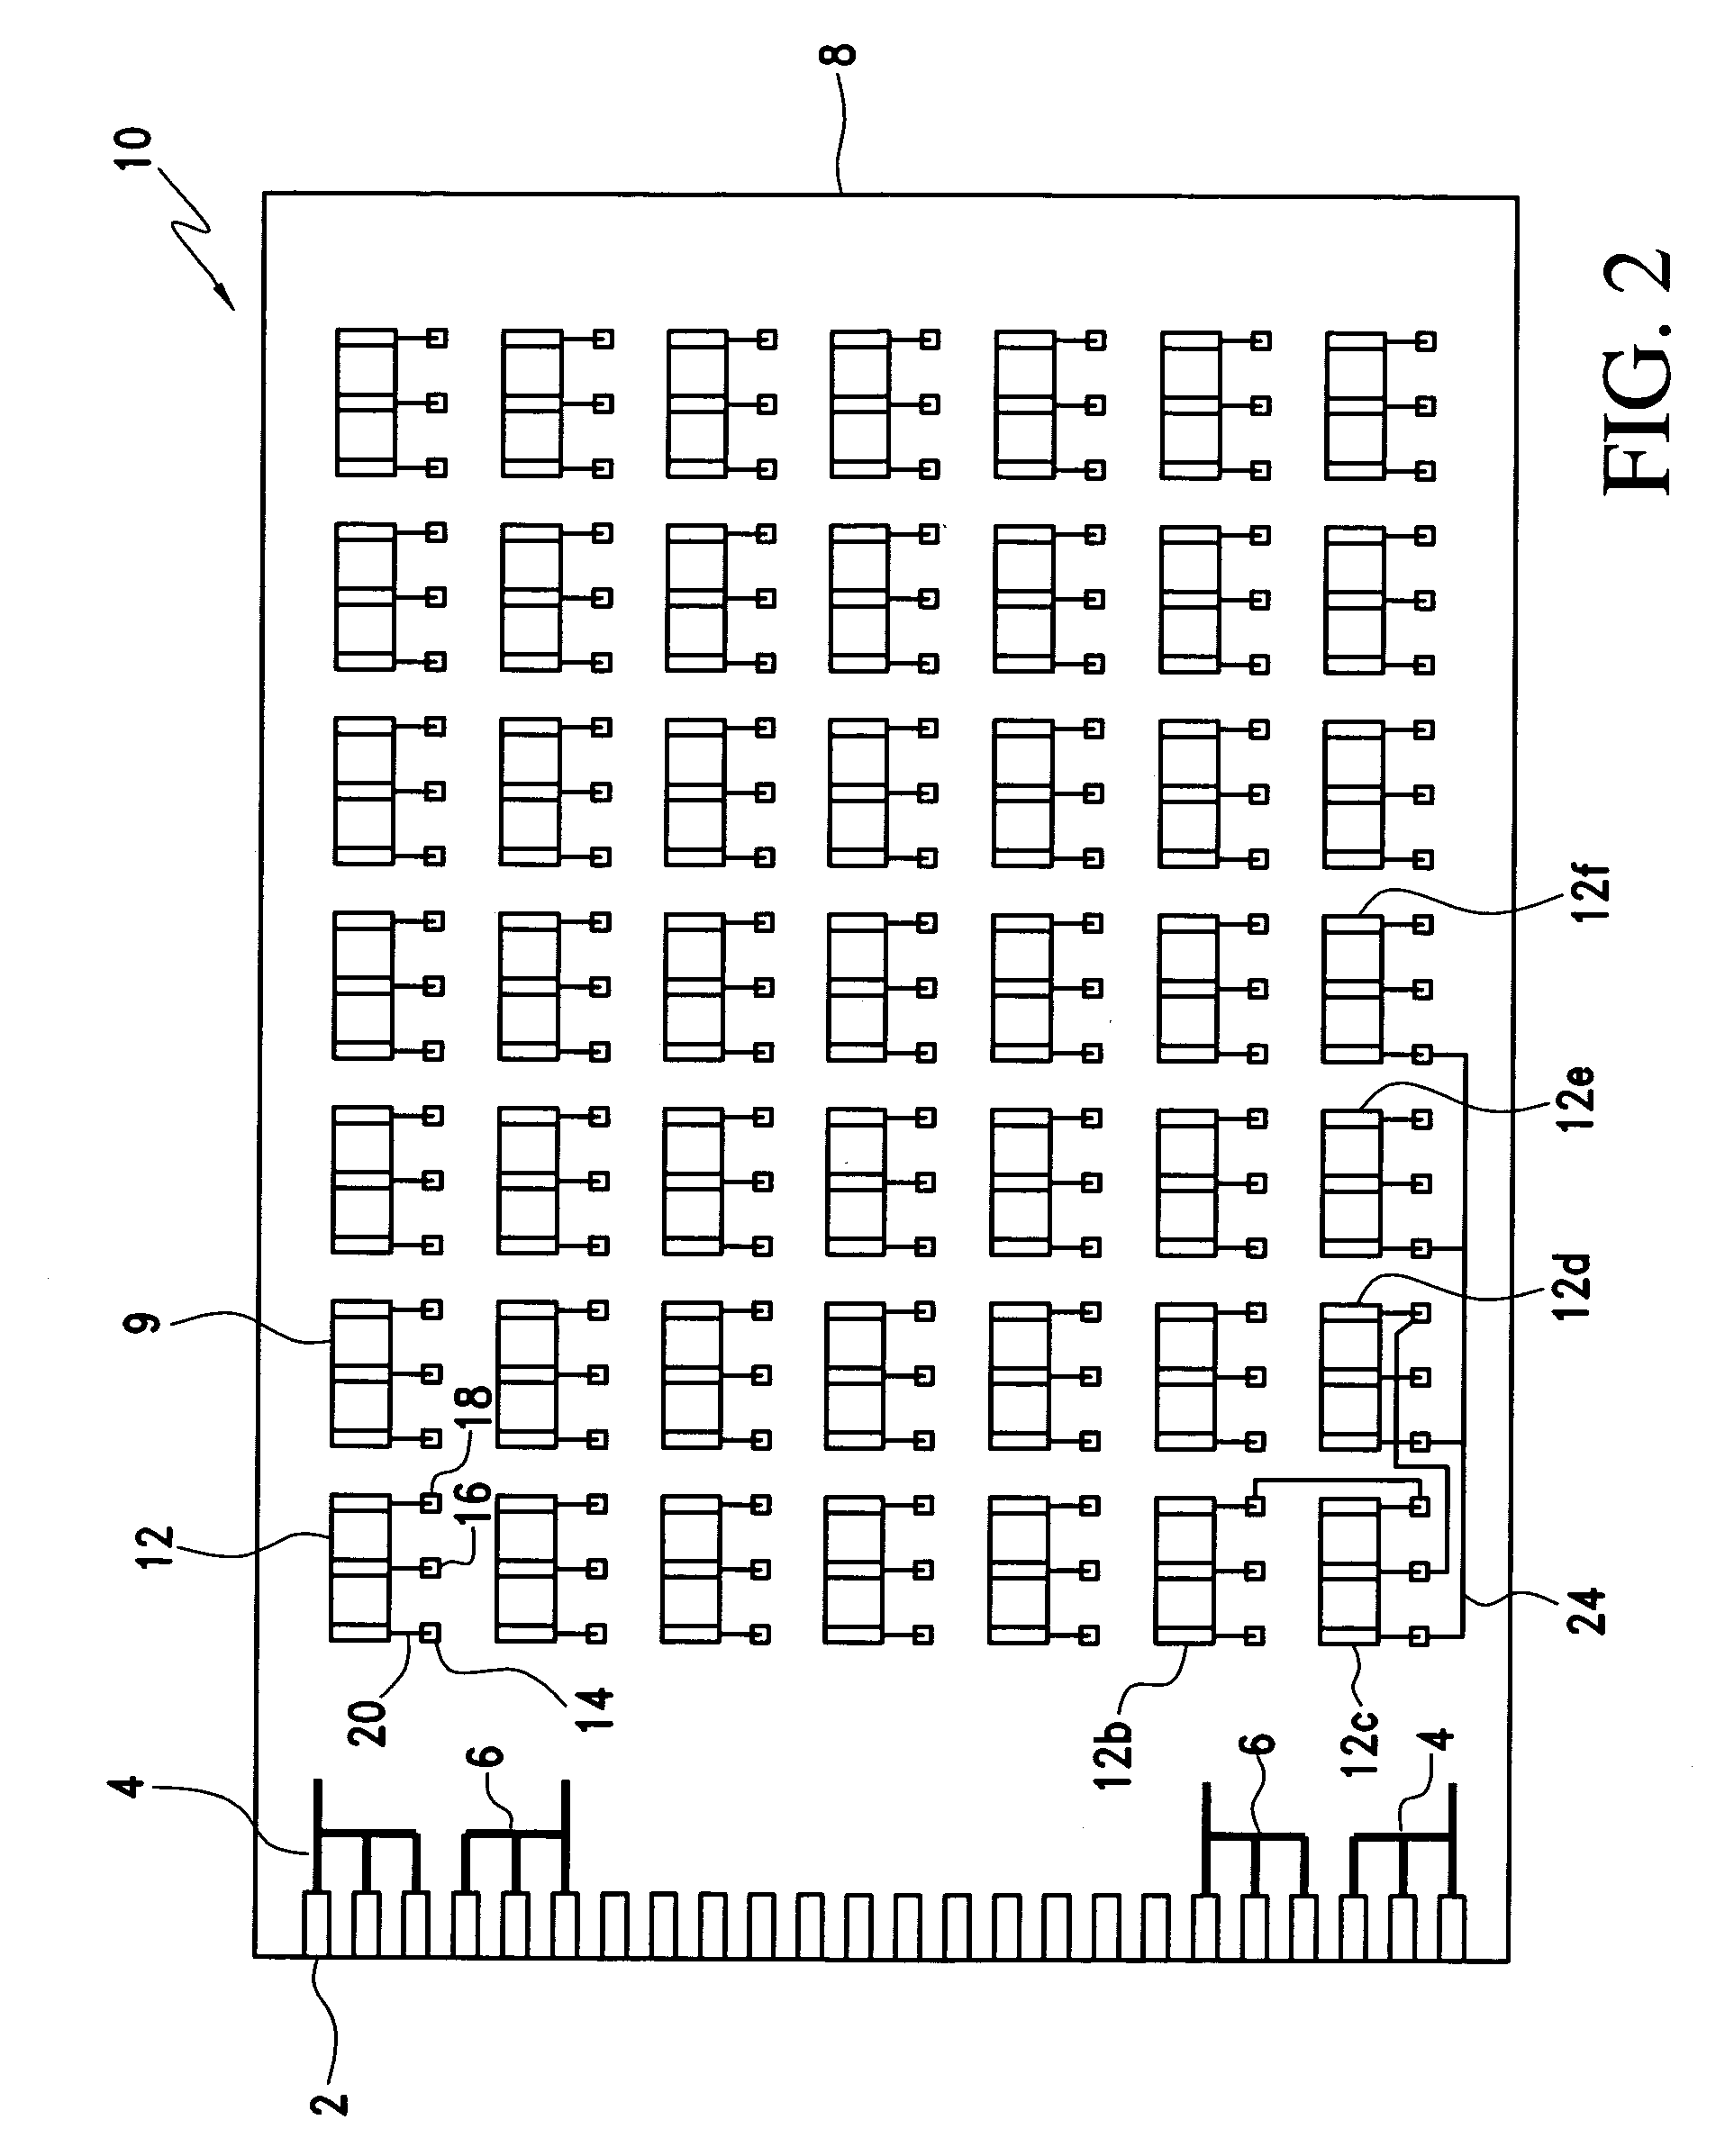 System and process for manufacturing custom electronics by combining traditional electronics with printable electronics